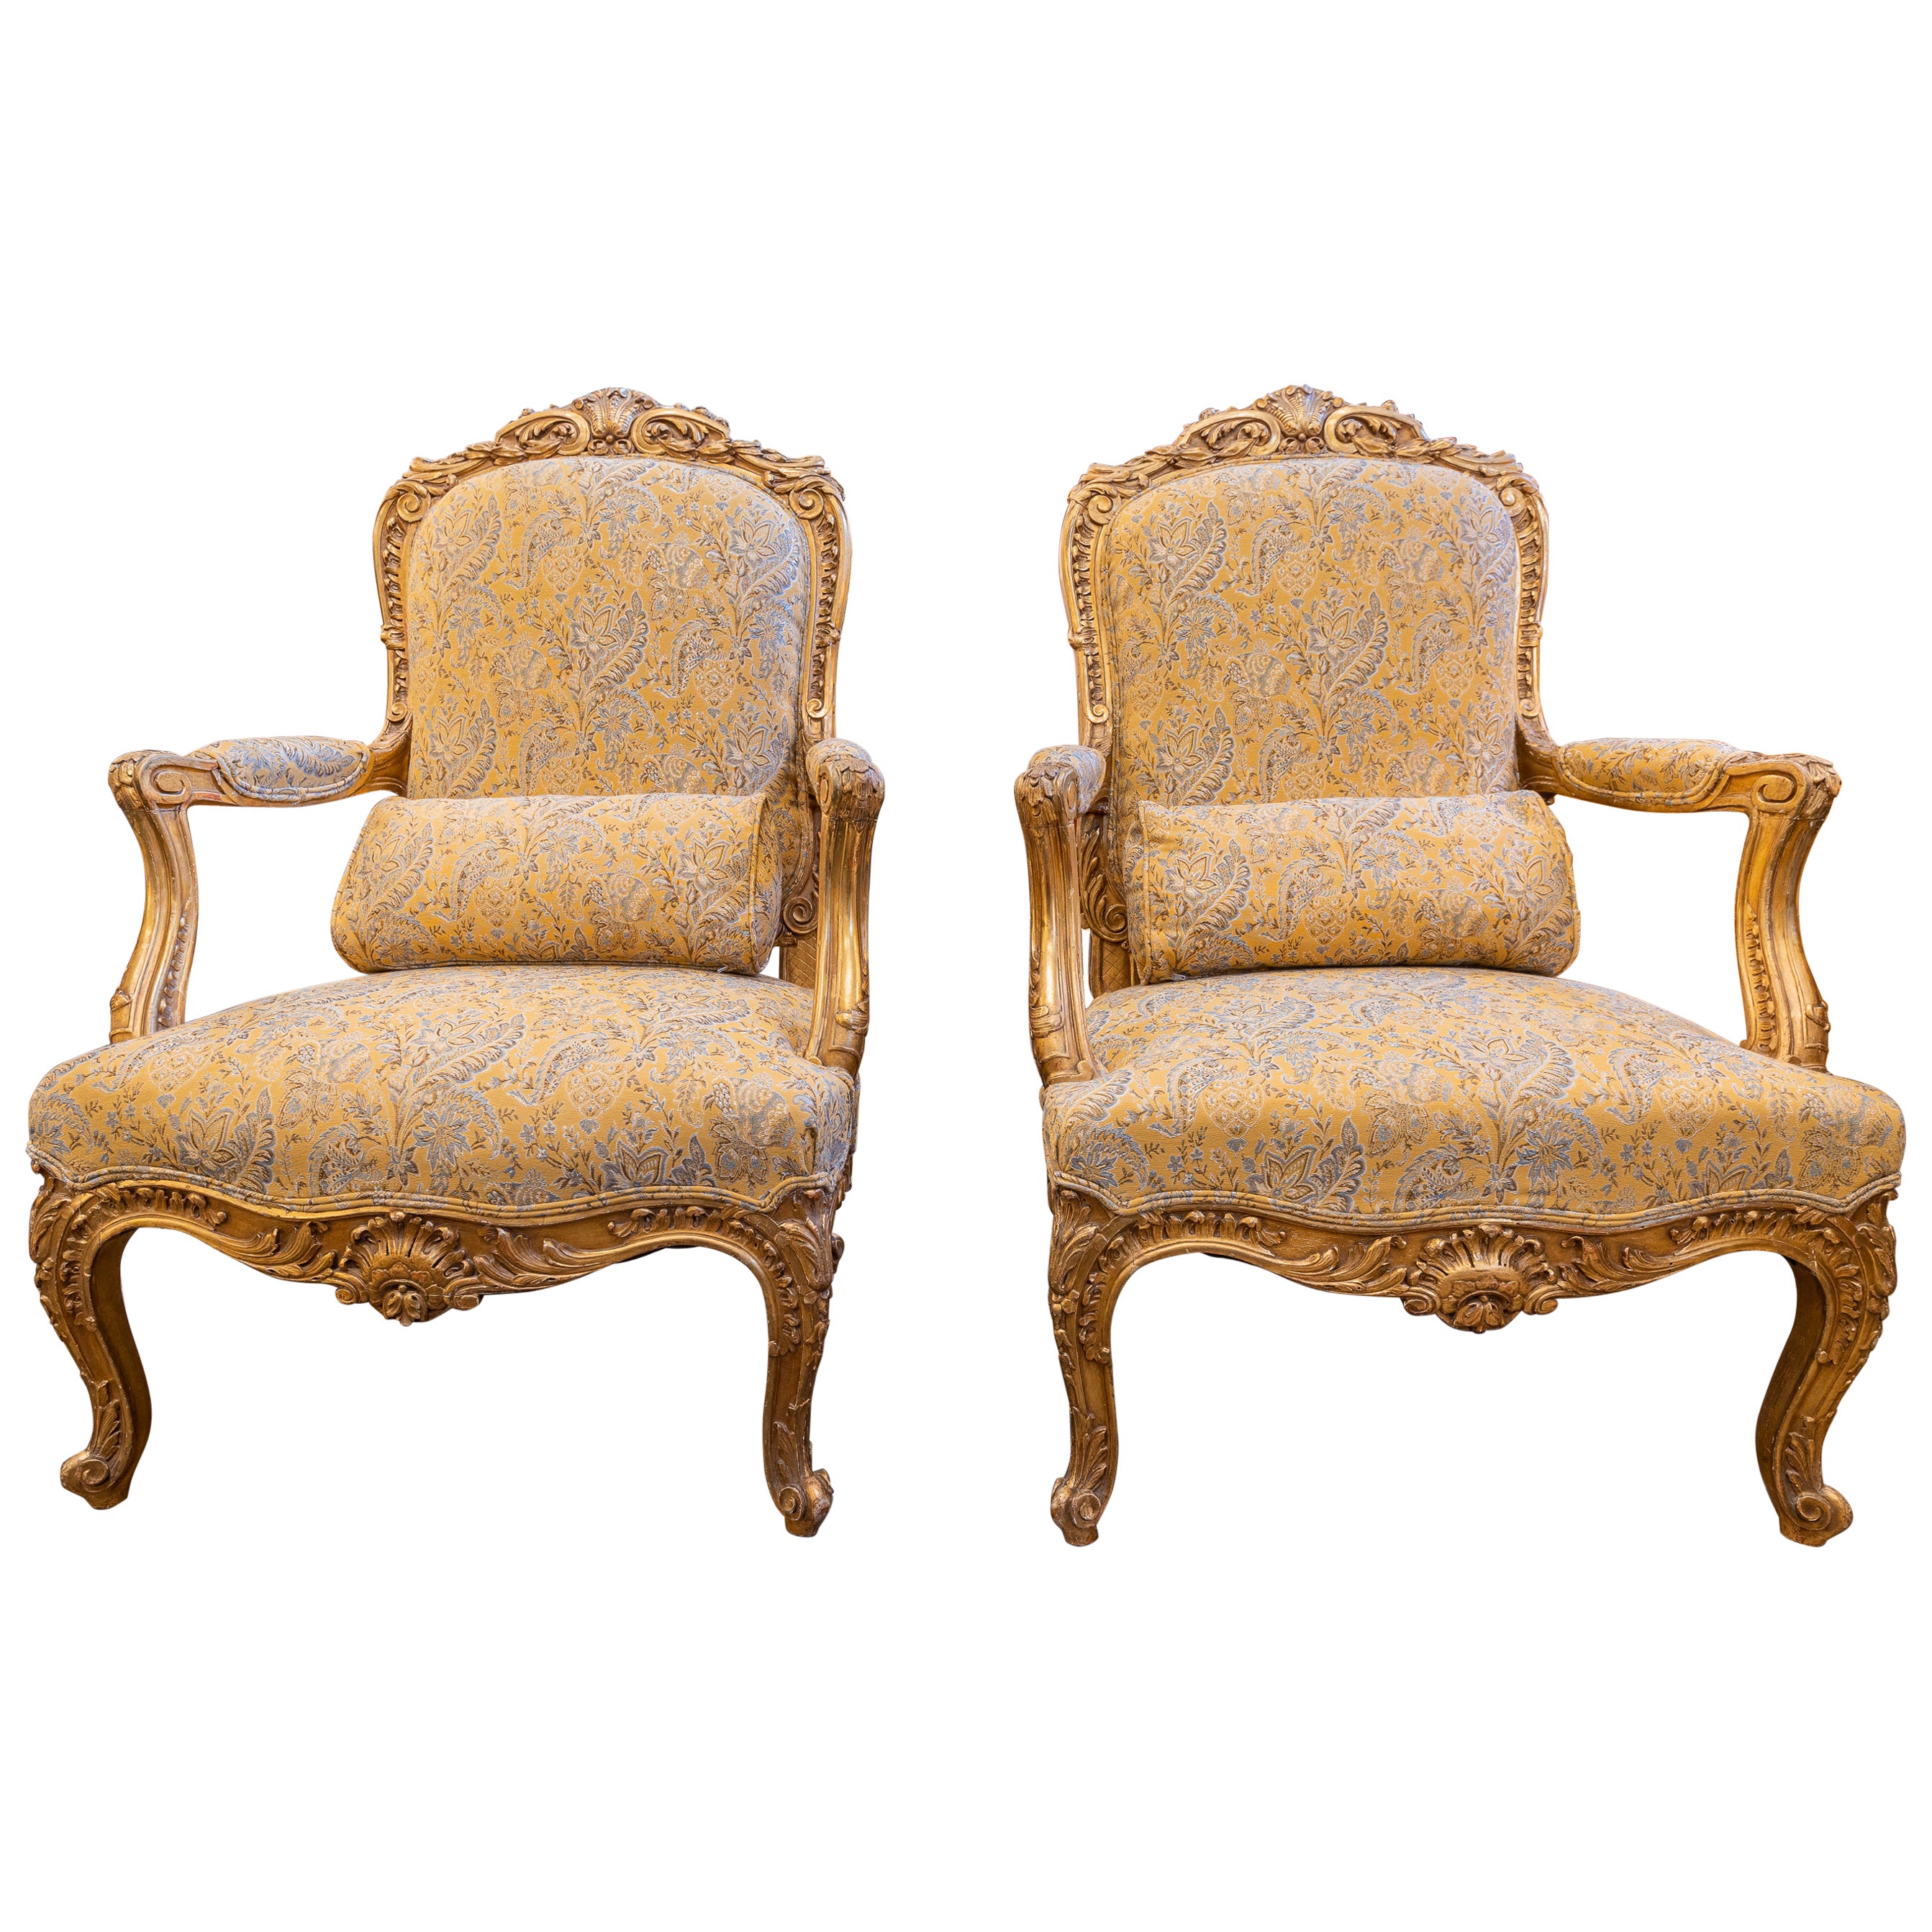 A fine large pair of 19th c gilt carved Louis XV fauteiuls For Sale